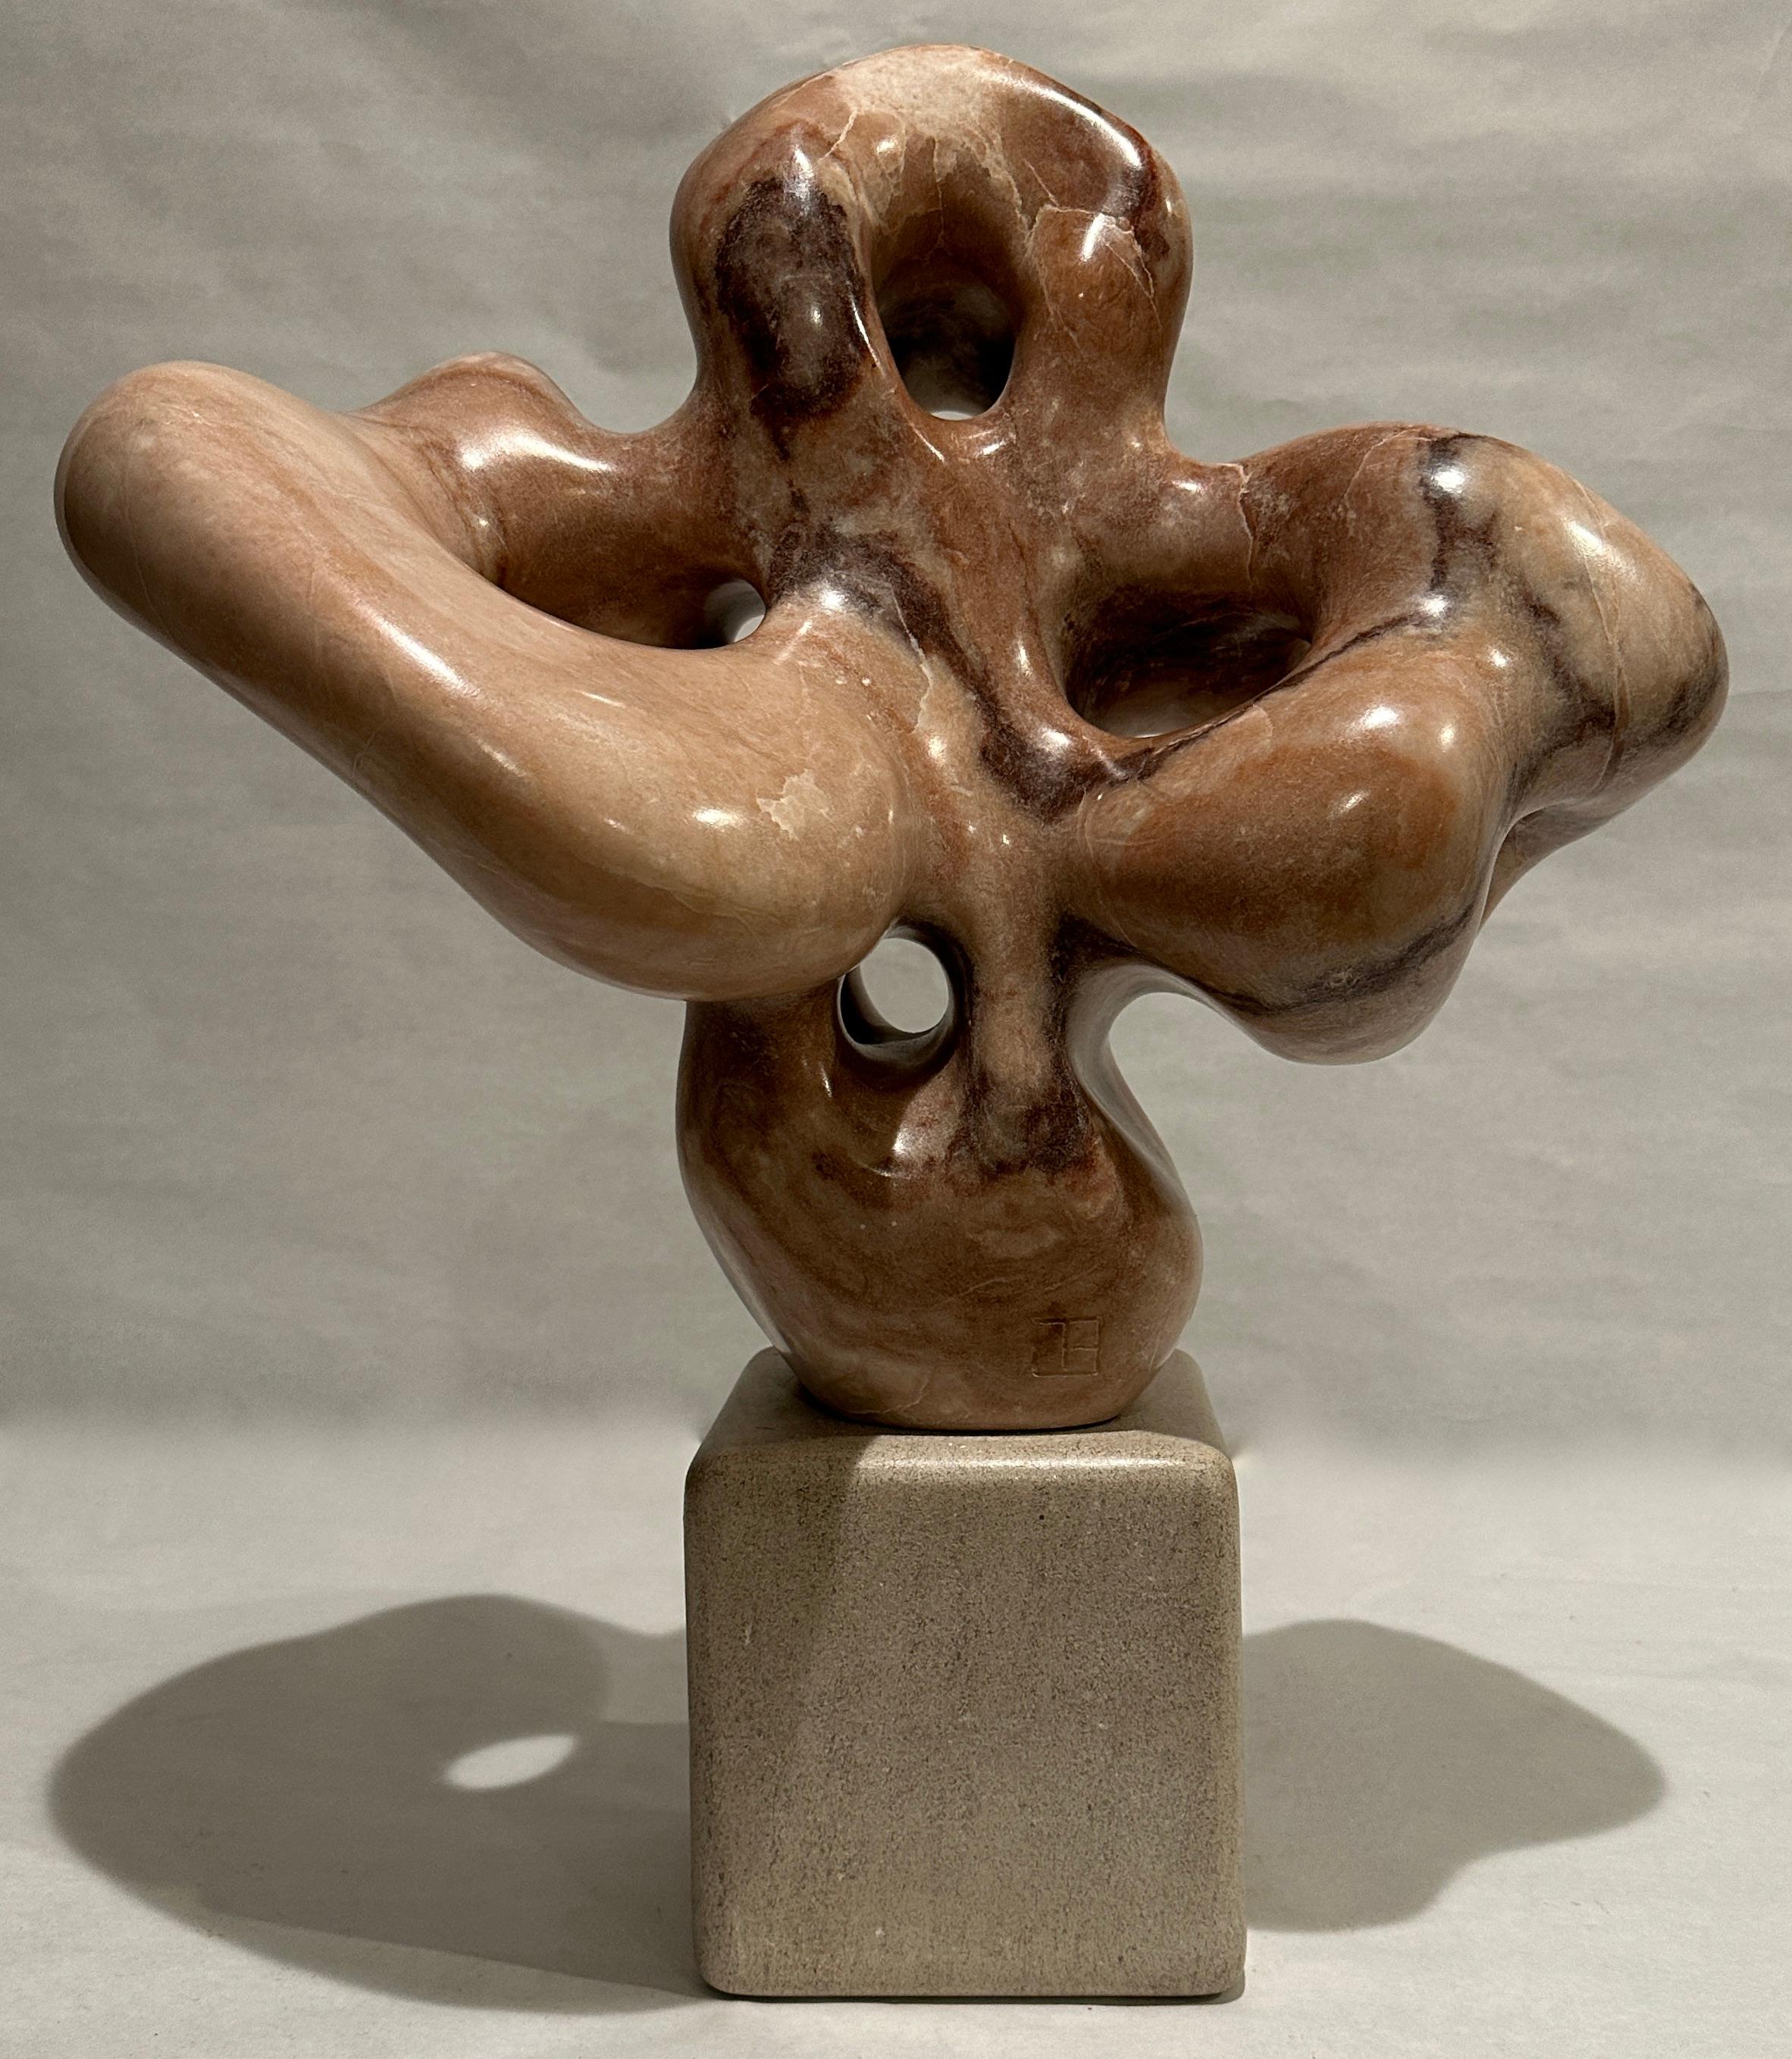 Biomorphic sculpture carved and polished from a block of marble by Orangeburg, NY sculptor Jeffrey Burtch. Executed c. 1980's. Marked with artist's initials. Raised on square limestone base.